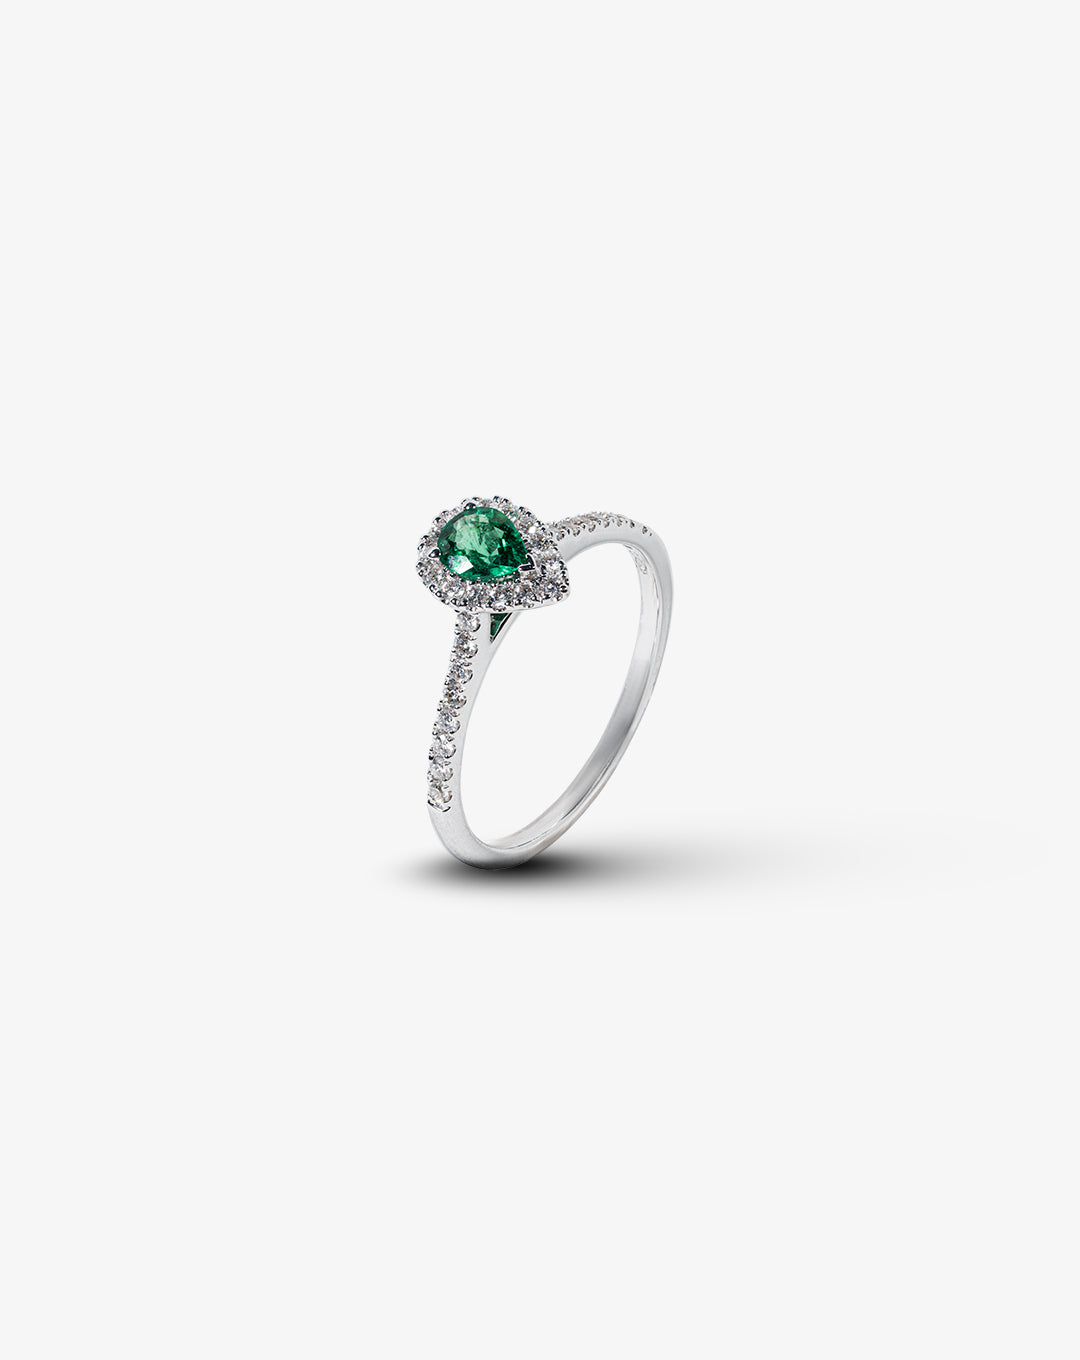 Briar rose three stone with natural emerald and black diamonds – Oore  jewelry